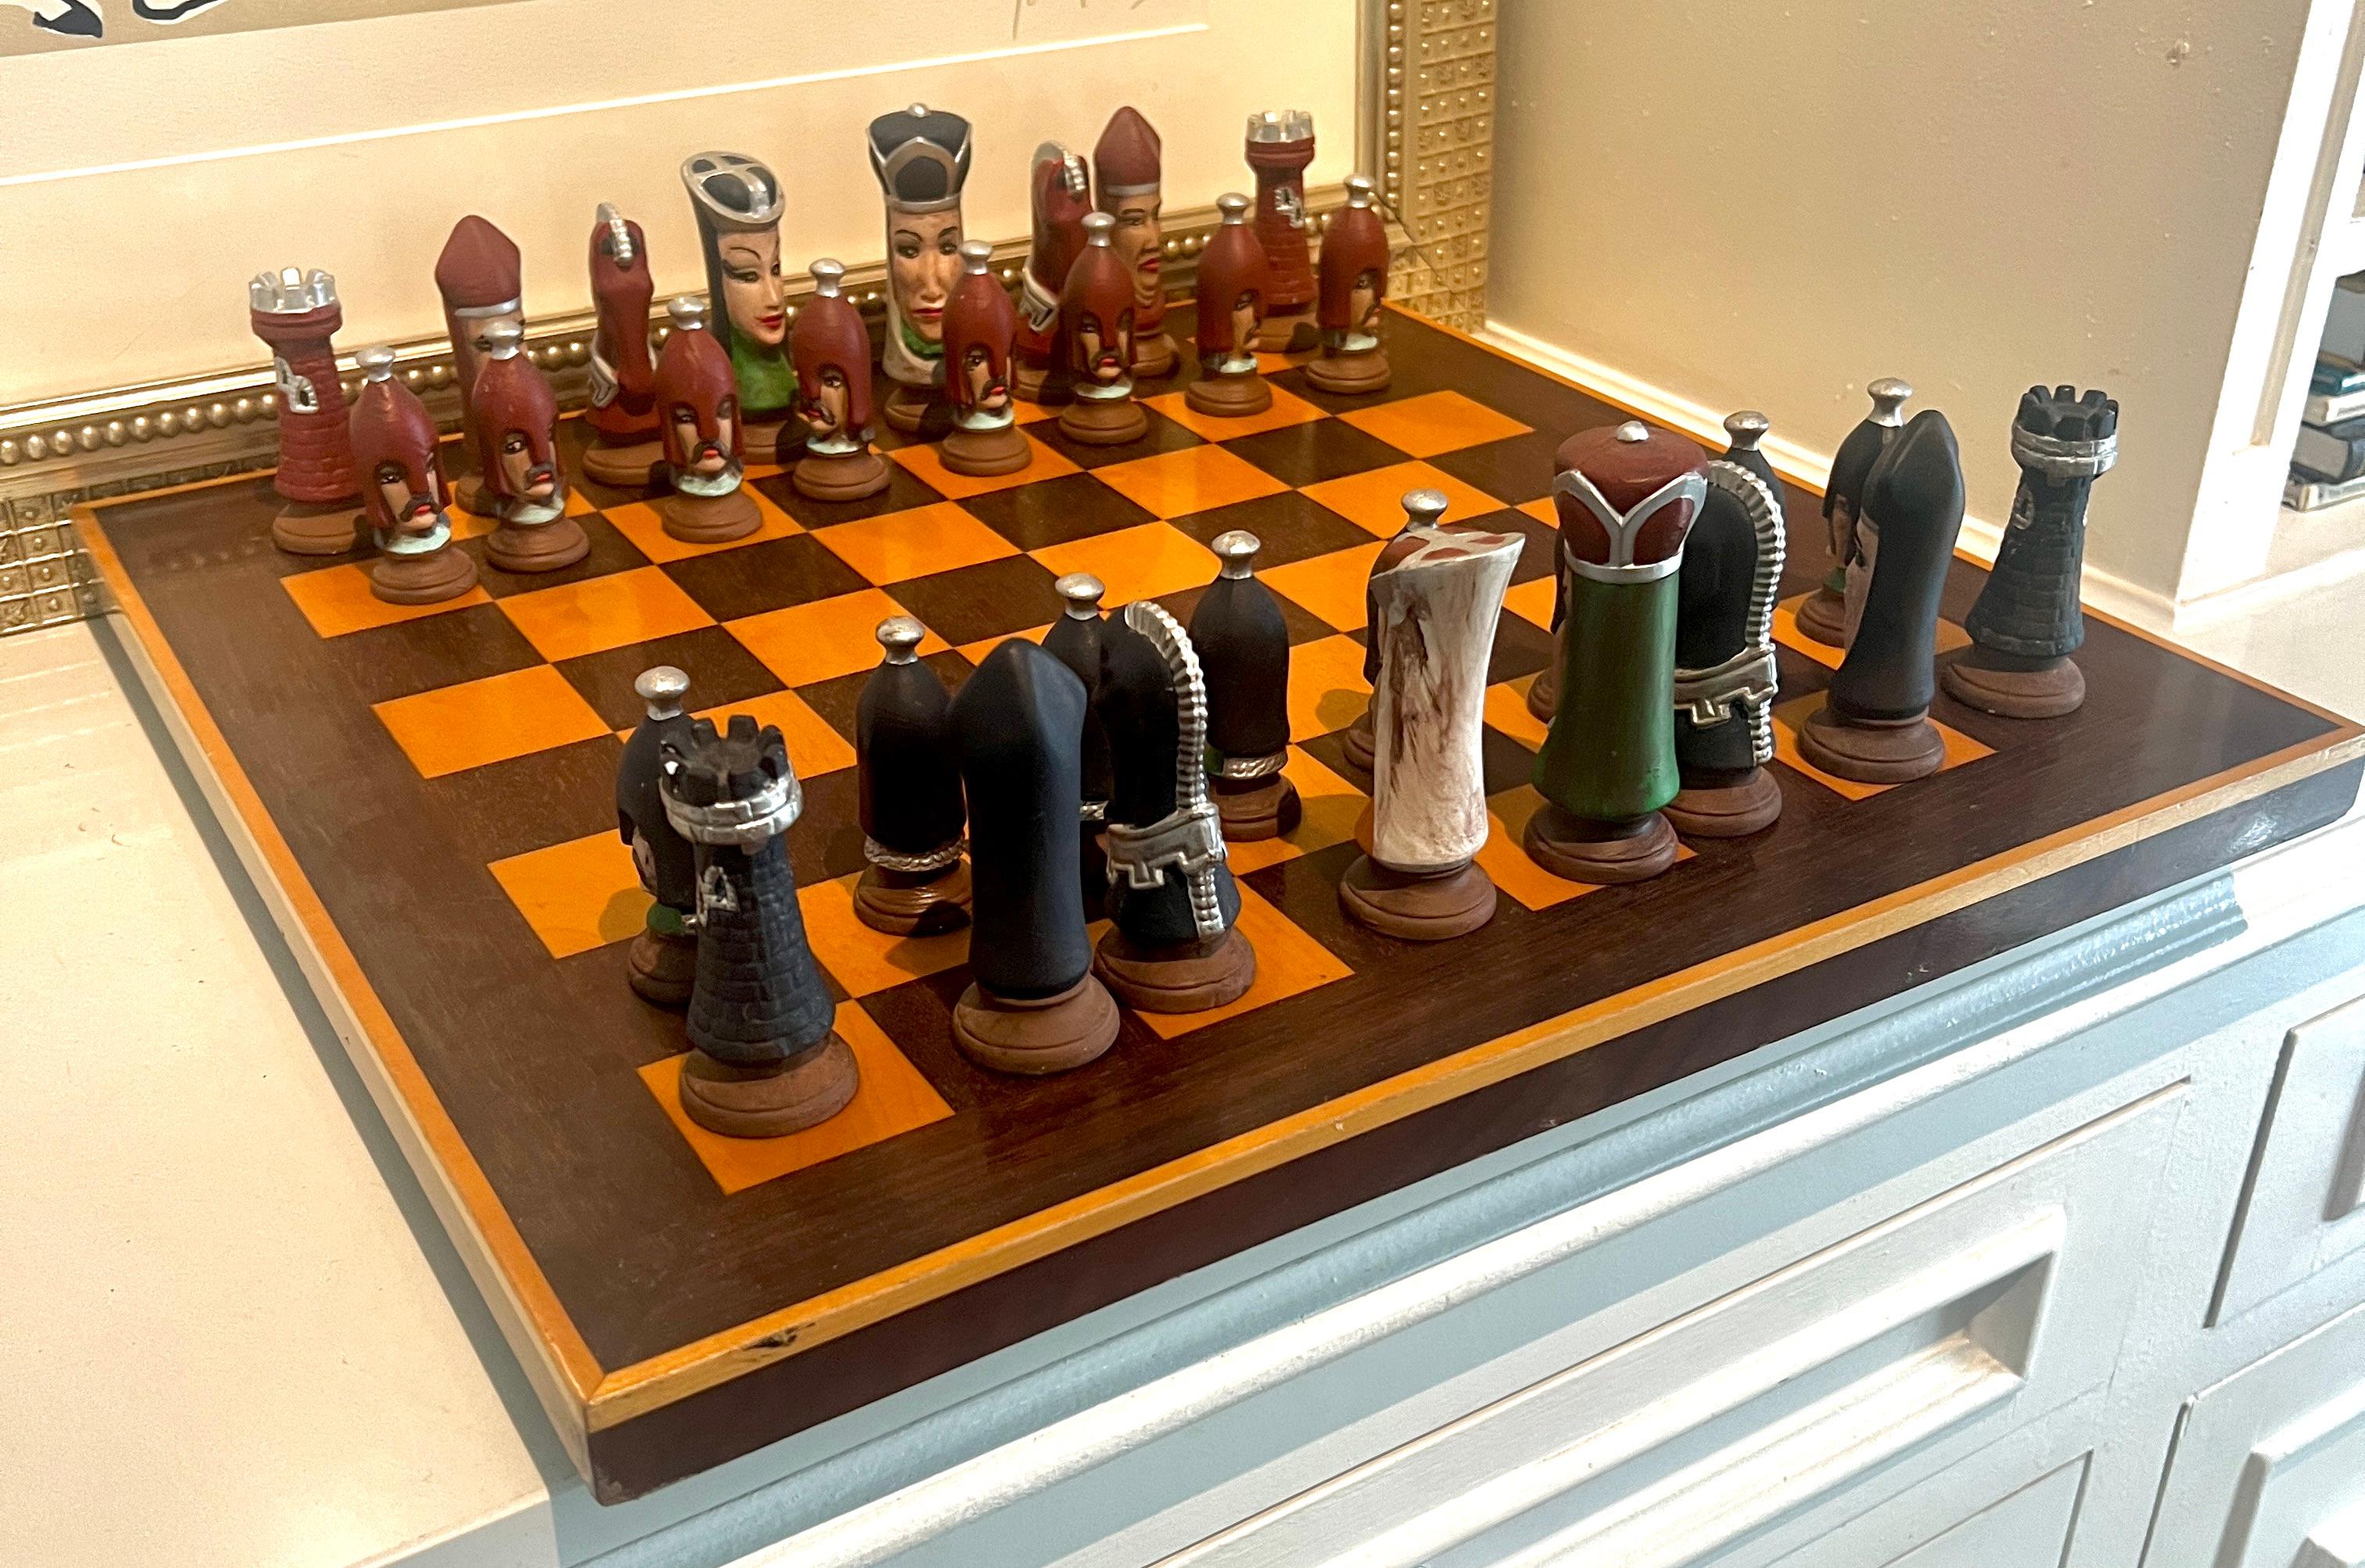 Hand-Painted Chess Checker Board with Hand Crafted Ceramic Chess Pieces For Sale